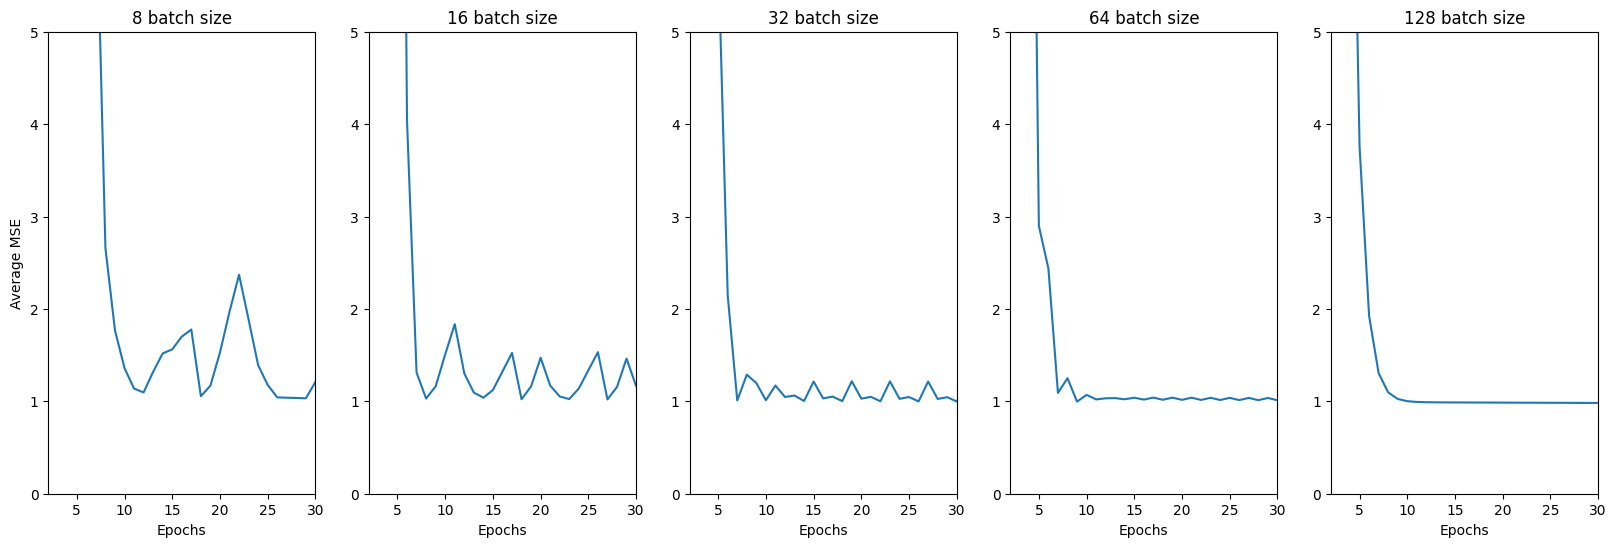 The effect of batch sizes on the cost function